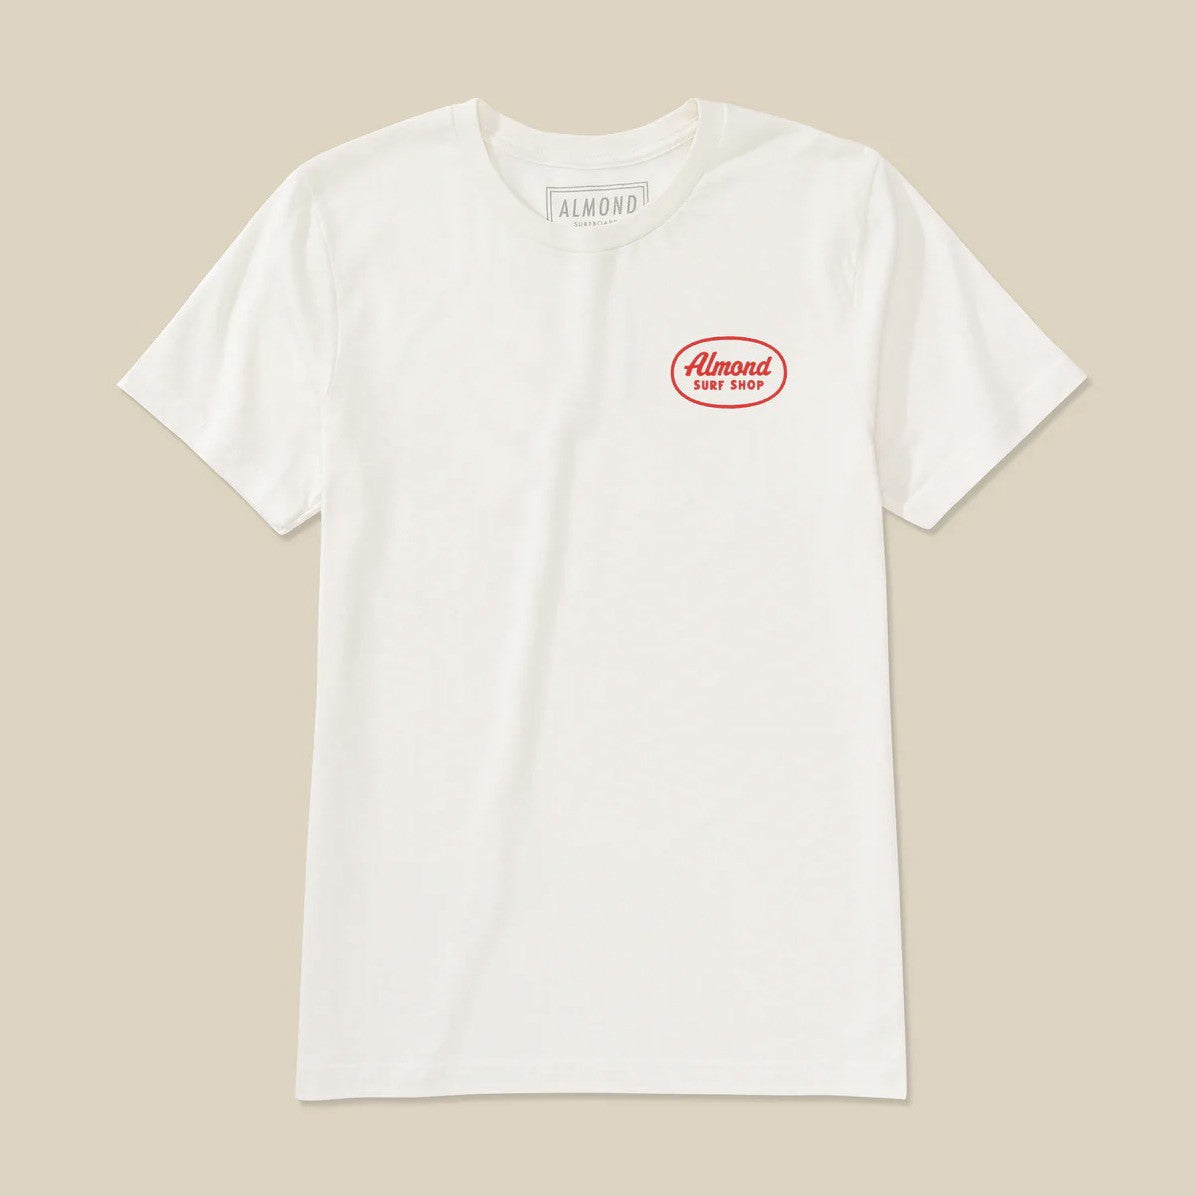 ALMOND Surfboards - Service Tee - White